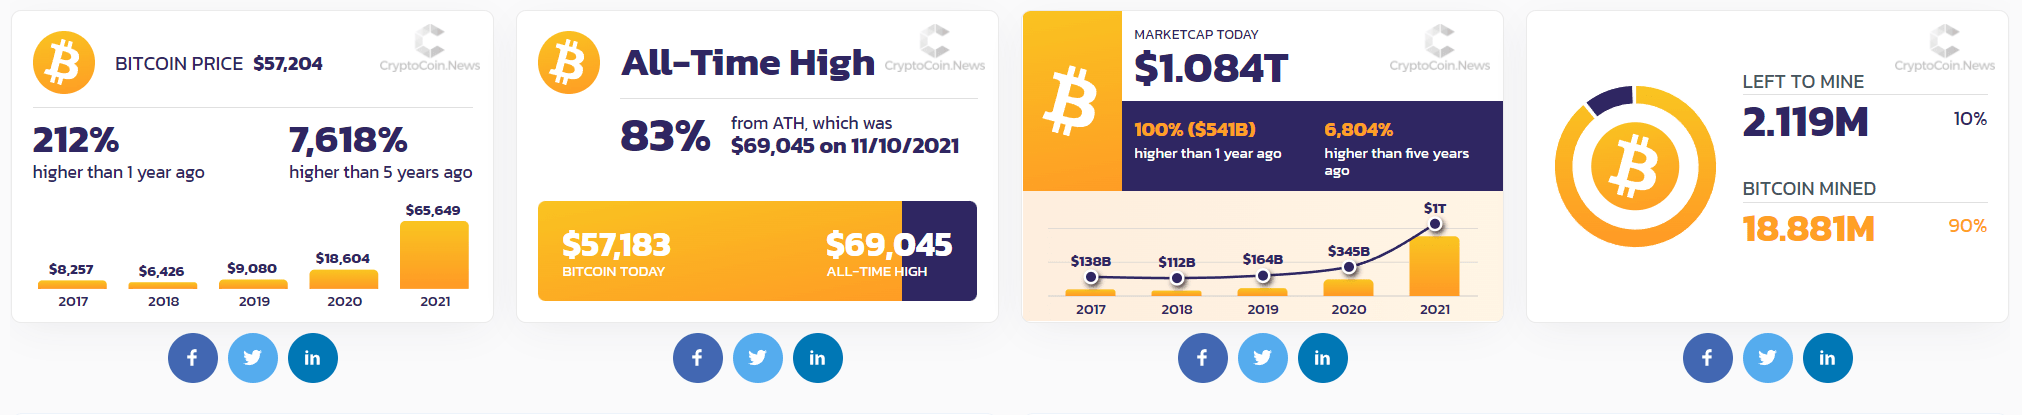 The Cryptocoin.news Dashboard Is Live With Real-time Market Data